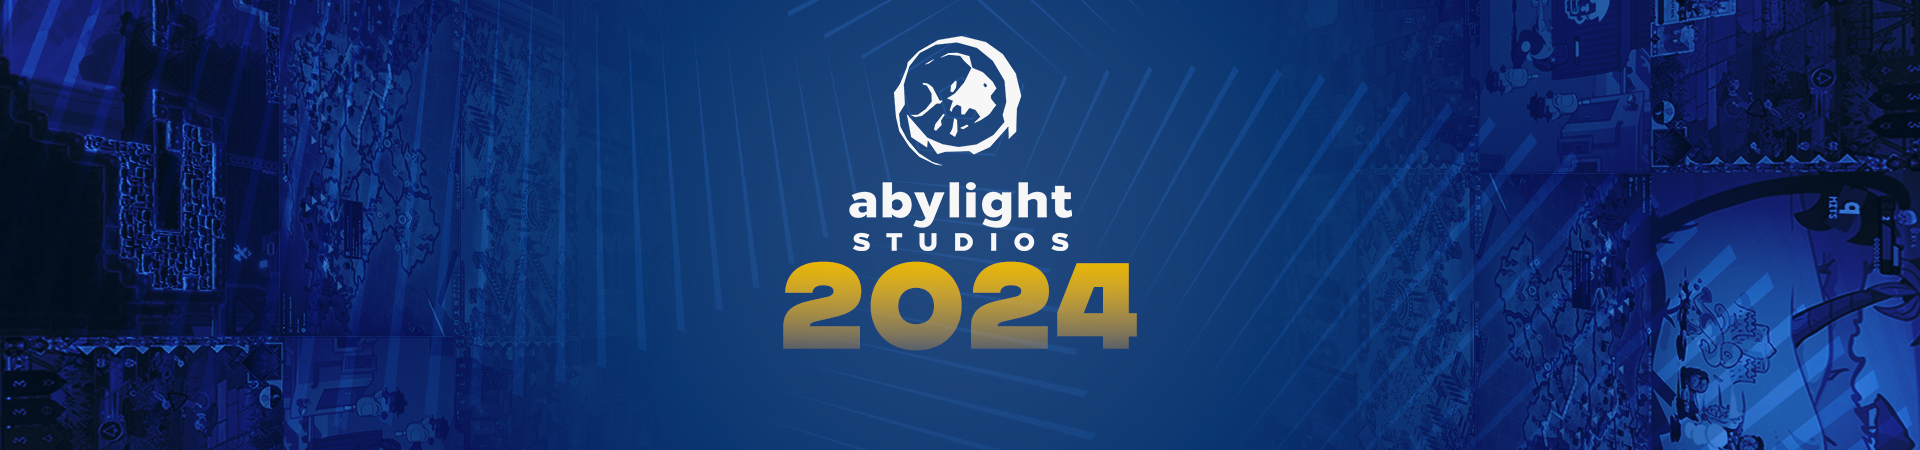 ▷ Abylight Studios Home | Abylight Studios | Services as Publisher of Abylight Studios.